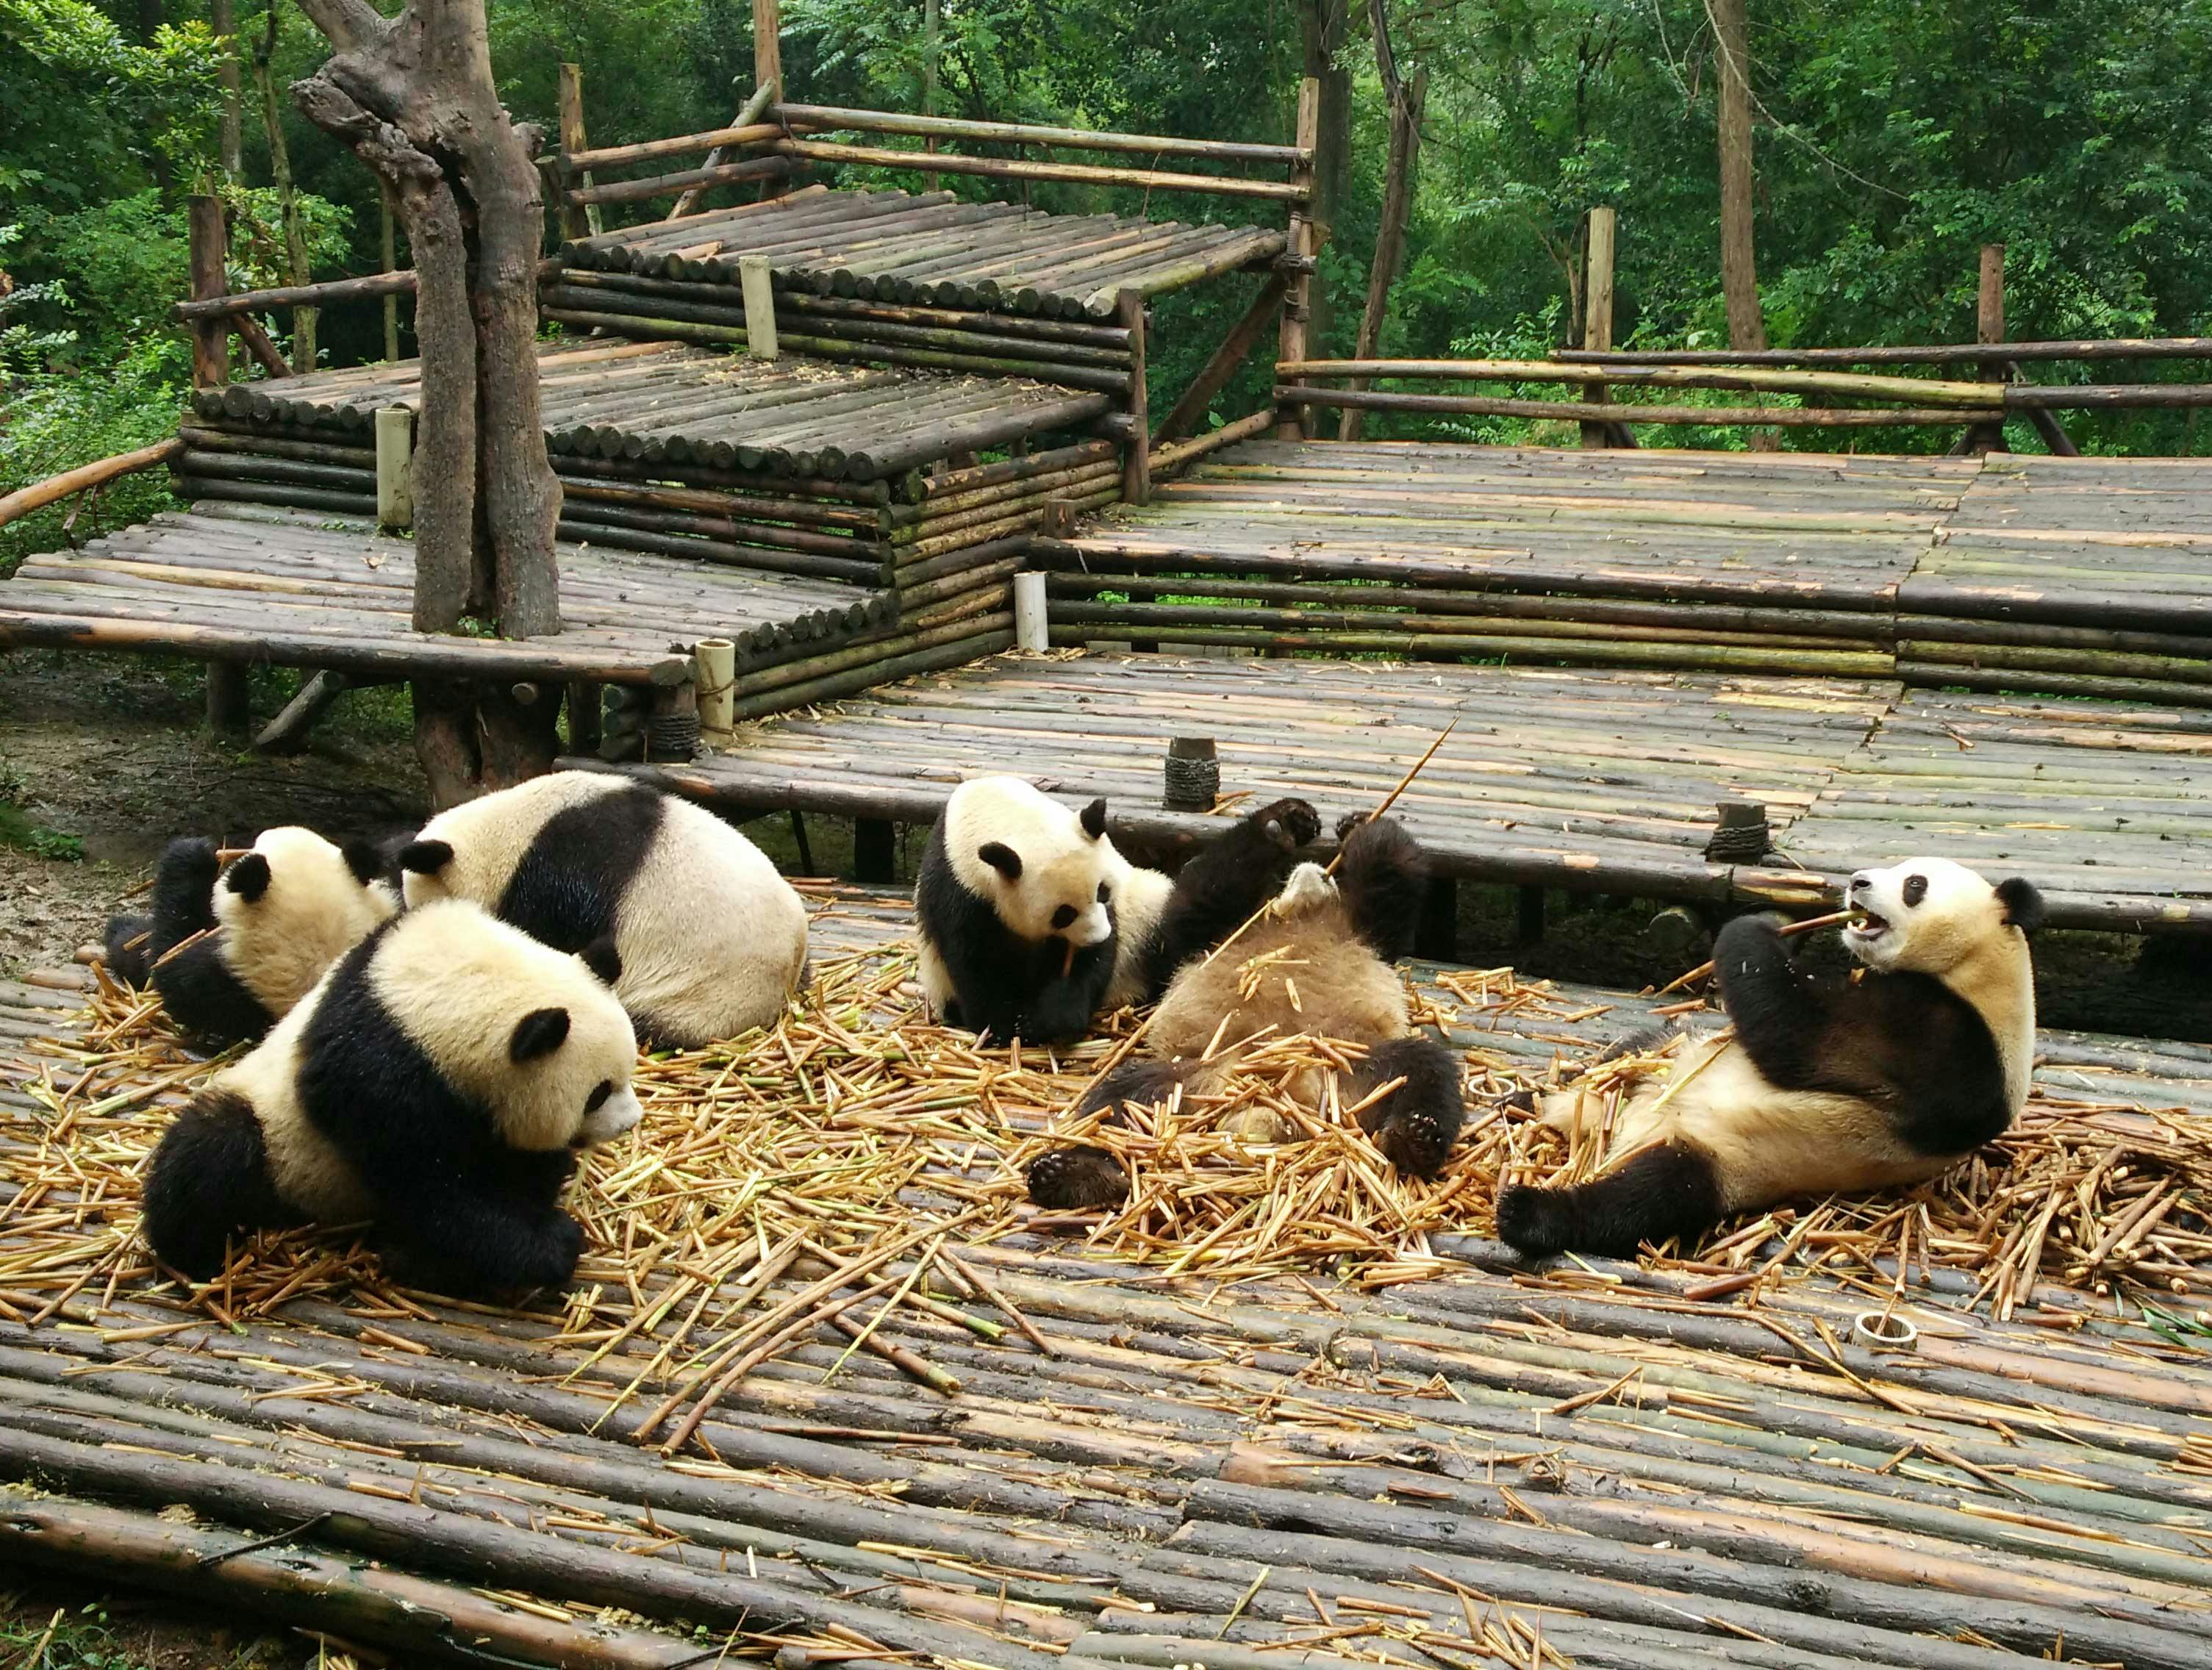 All-inclusive Panda trip and customizable sites